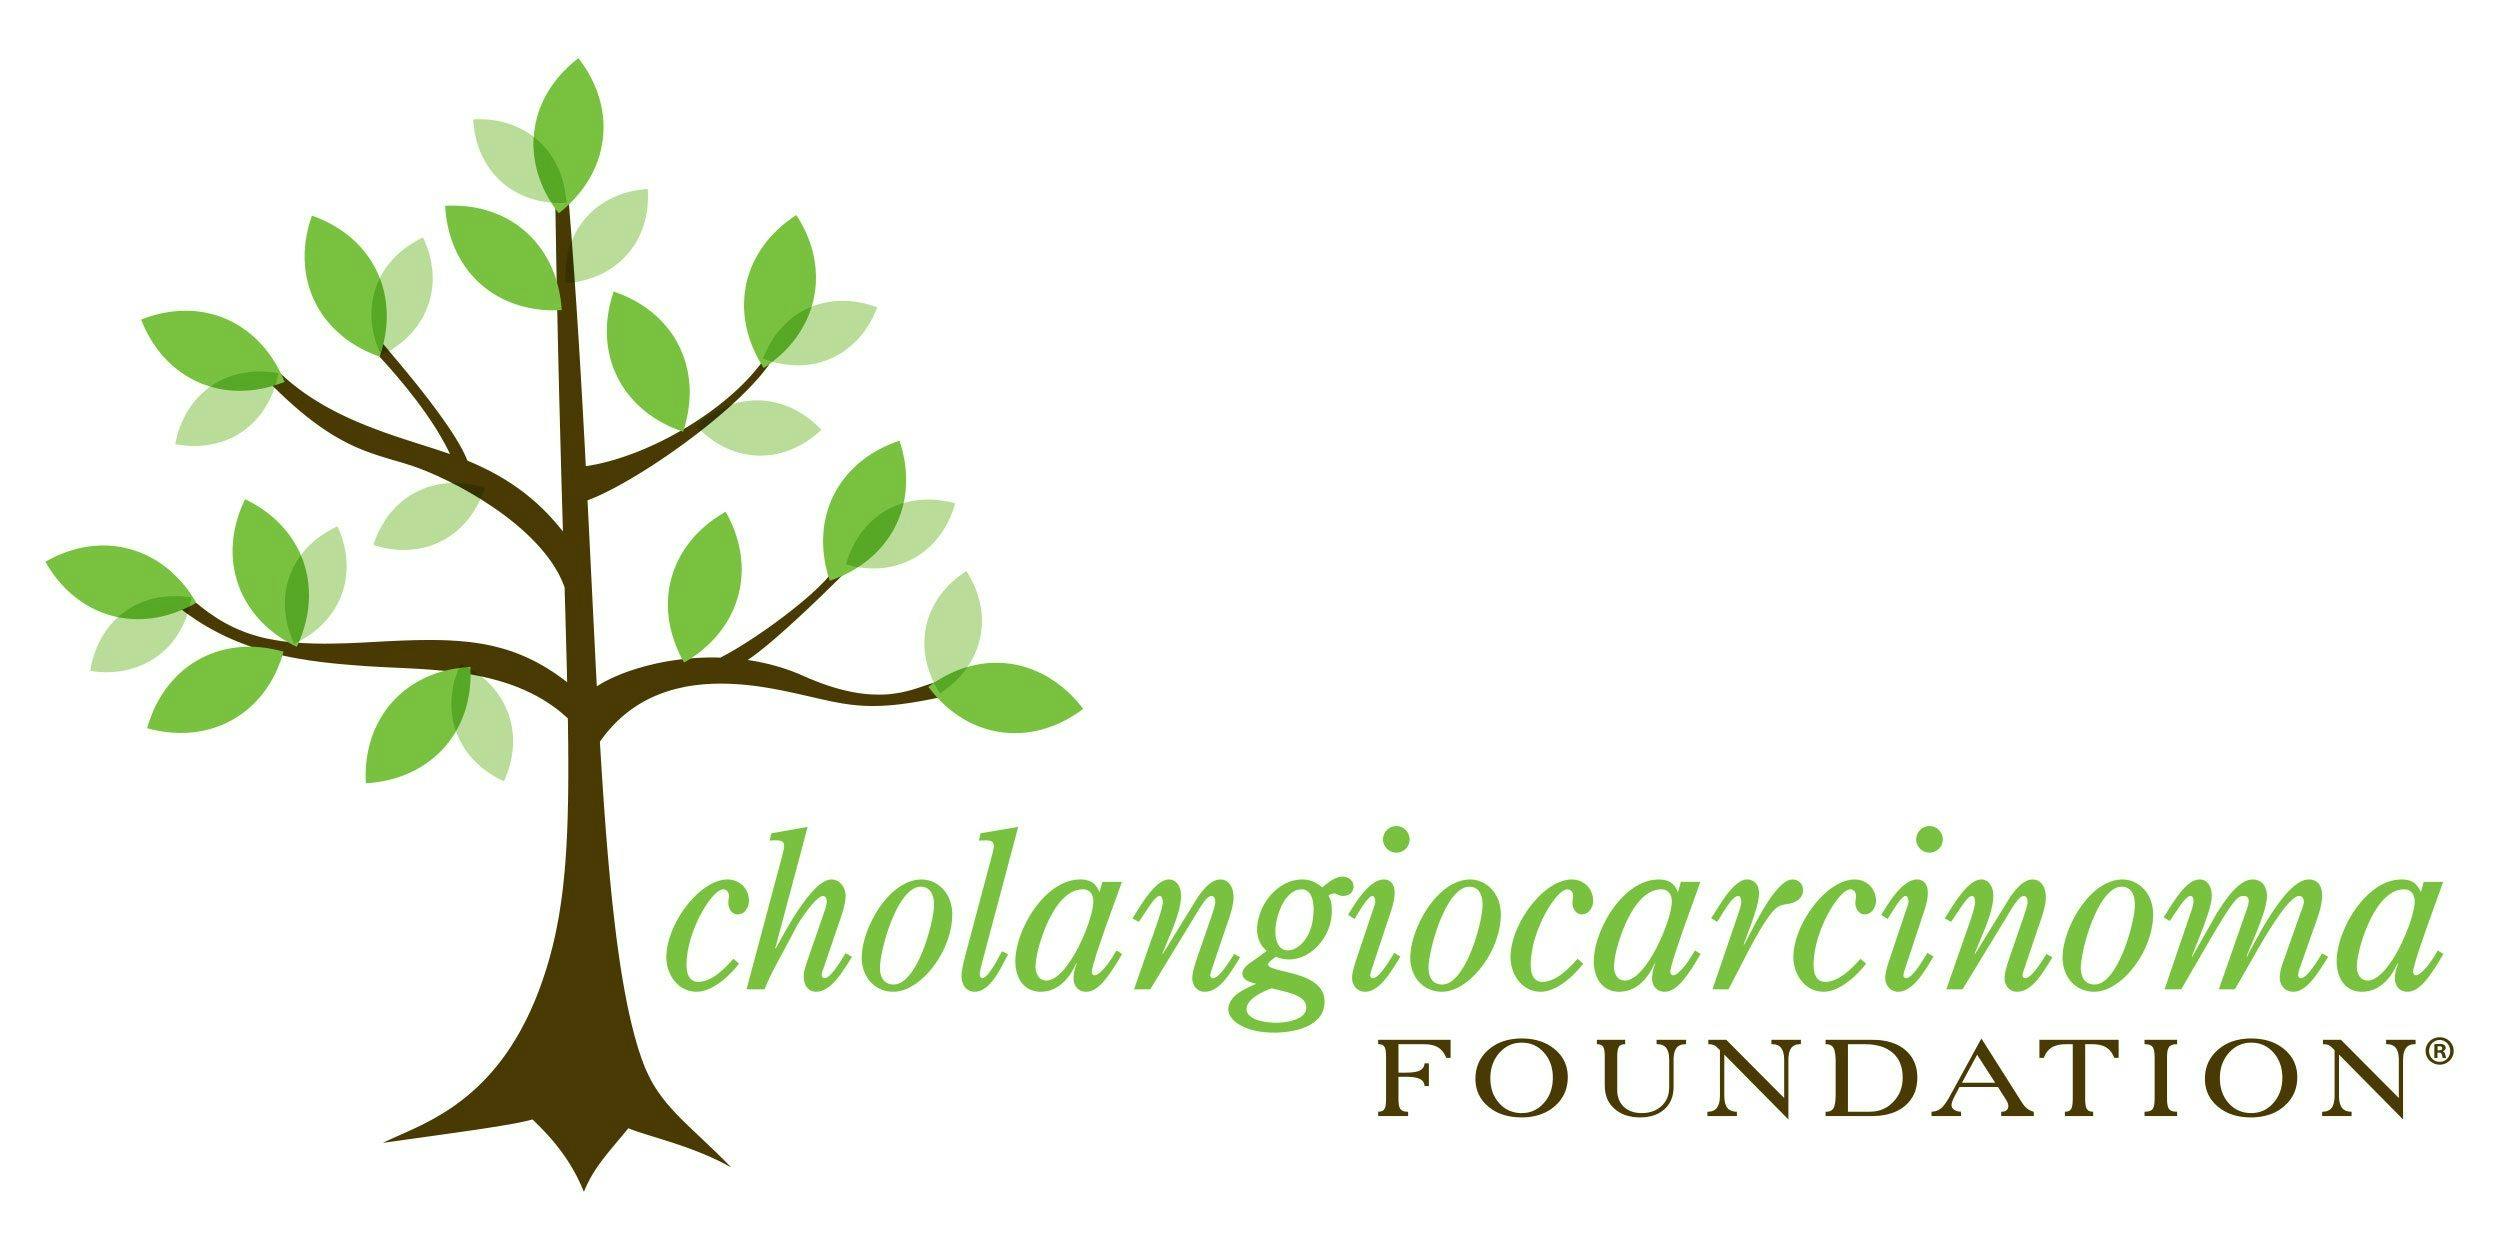 Rare Cancer Day is supported by Cholangiocarcinoma Foundation with video series called ‘Patient Voices’